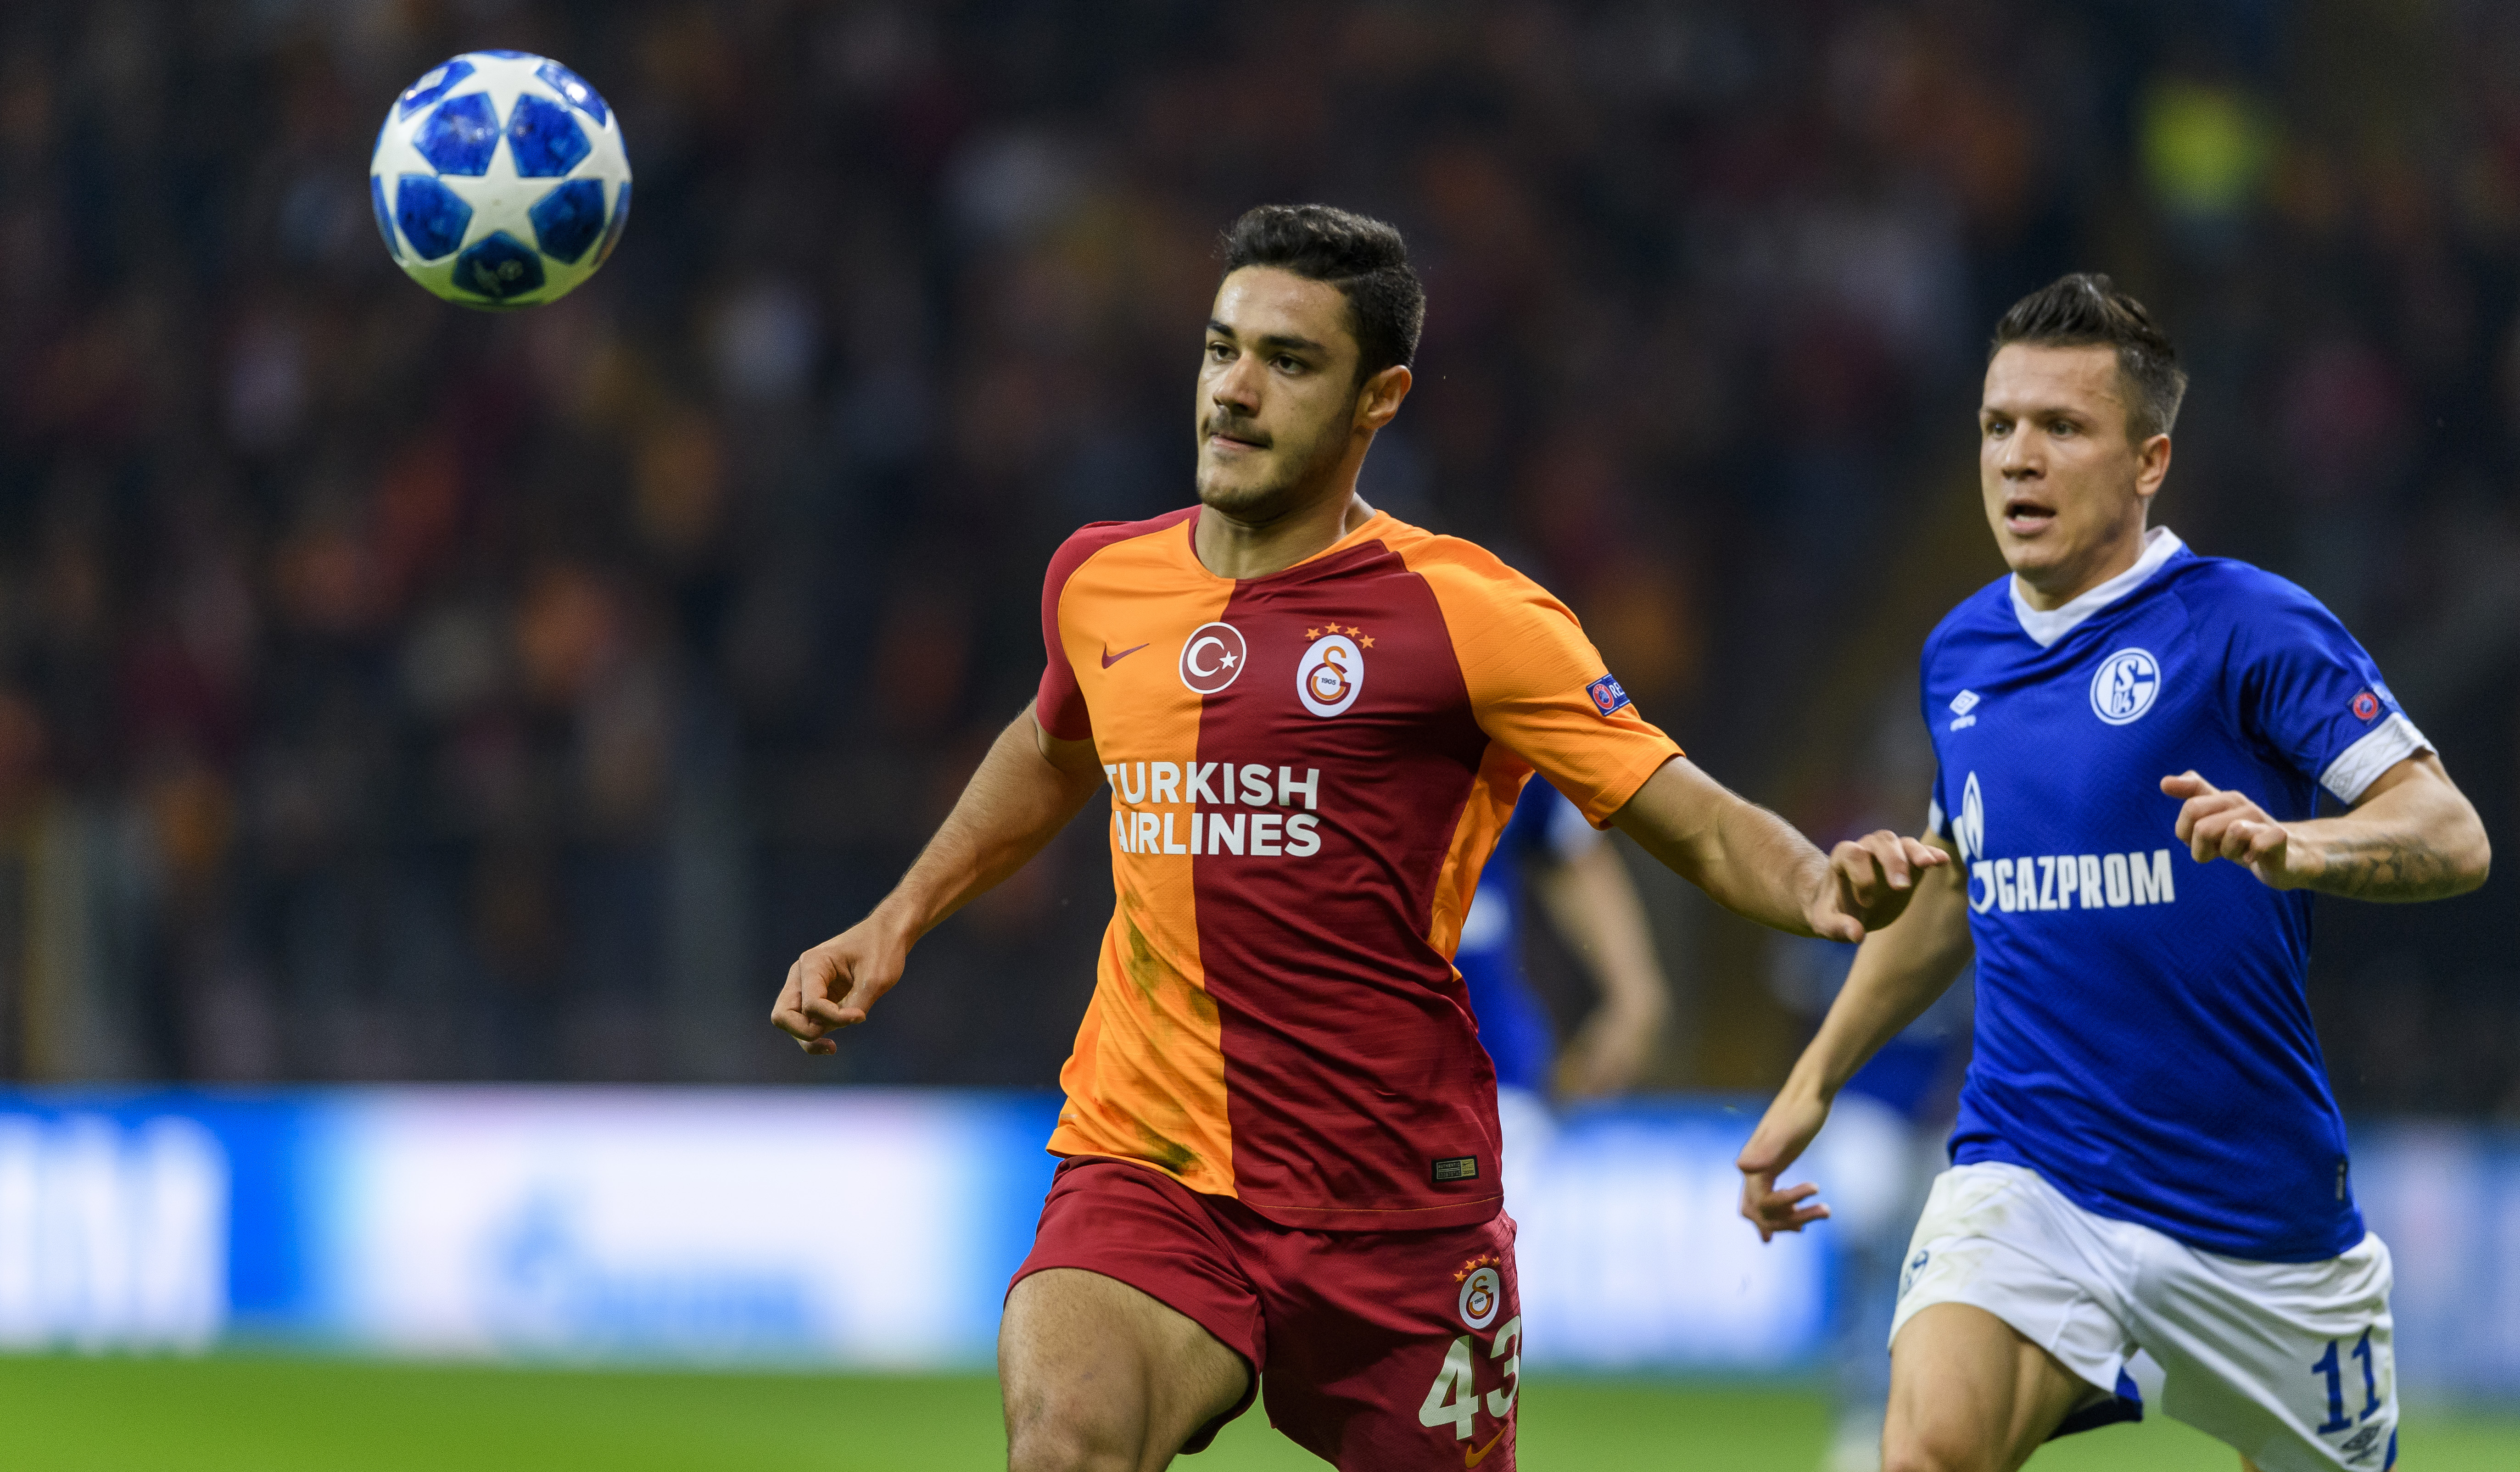 ISTANBUL, TURKEY - OCTOBER 24: Ozan Kabak of Galatasaray in action against Yeven Konoplyanka of Schalke during the Group D match of the UEFA Champions League between Galatasaray and FC Schalke 04 at Turk Telekom Arena on October 24, 2018 in Istanbul, Turkey. (Photo by Alexander Scheuber/Bongarts/Getty Images)